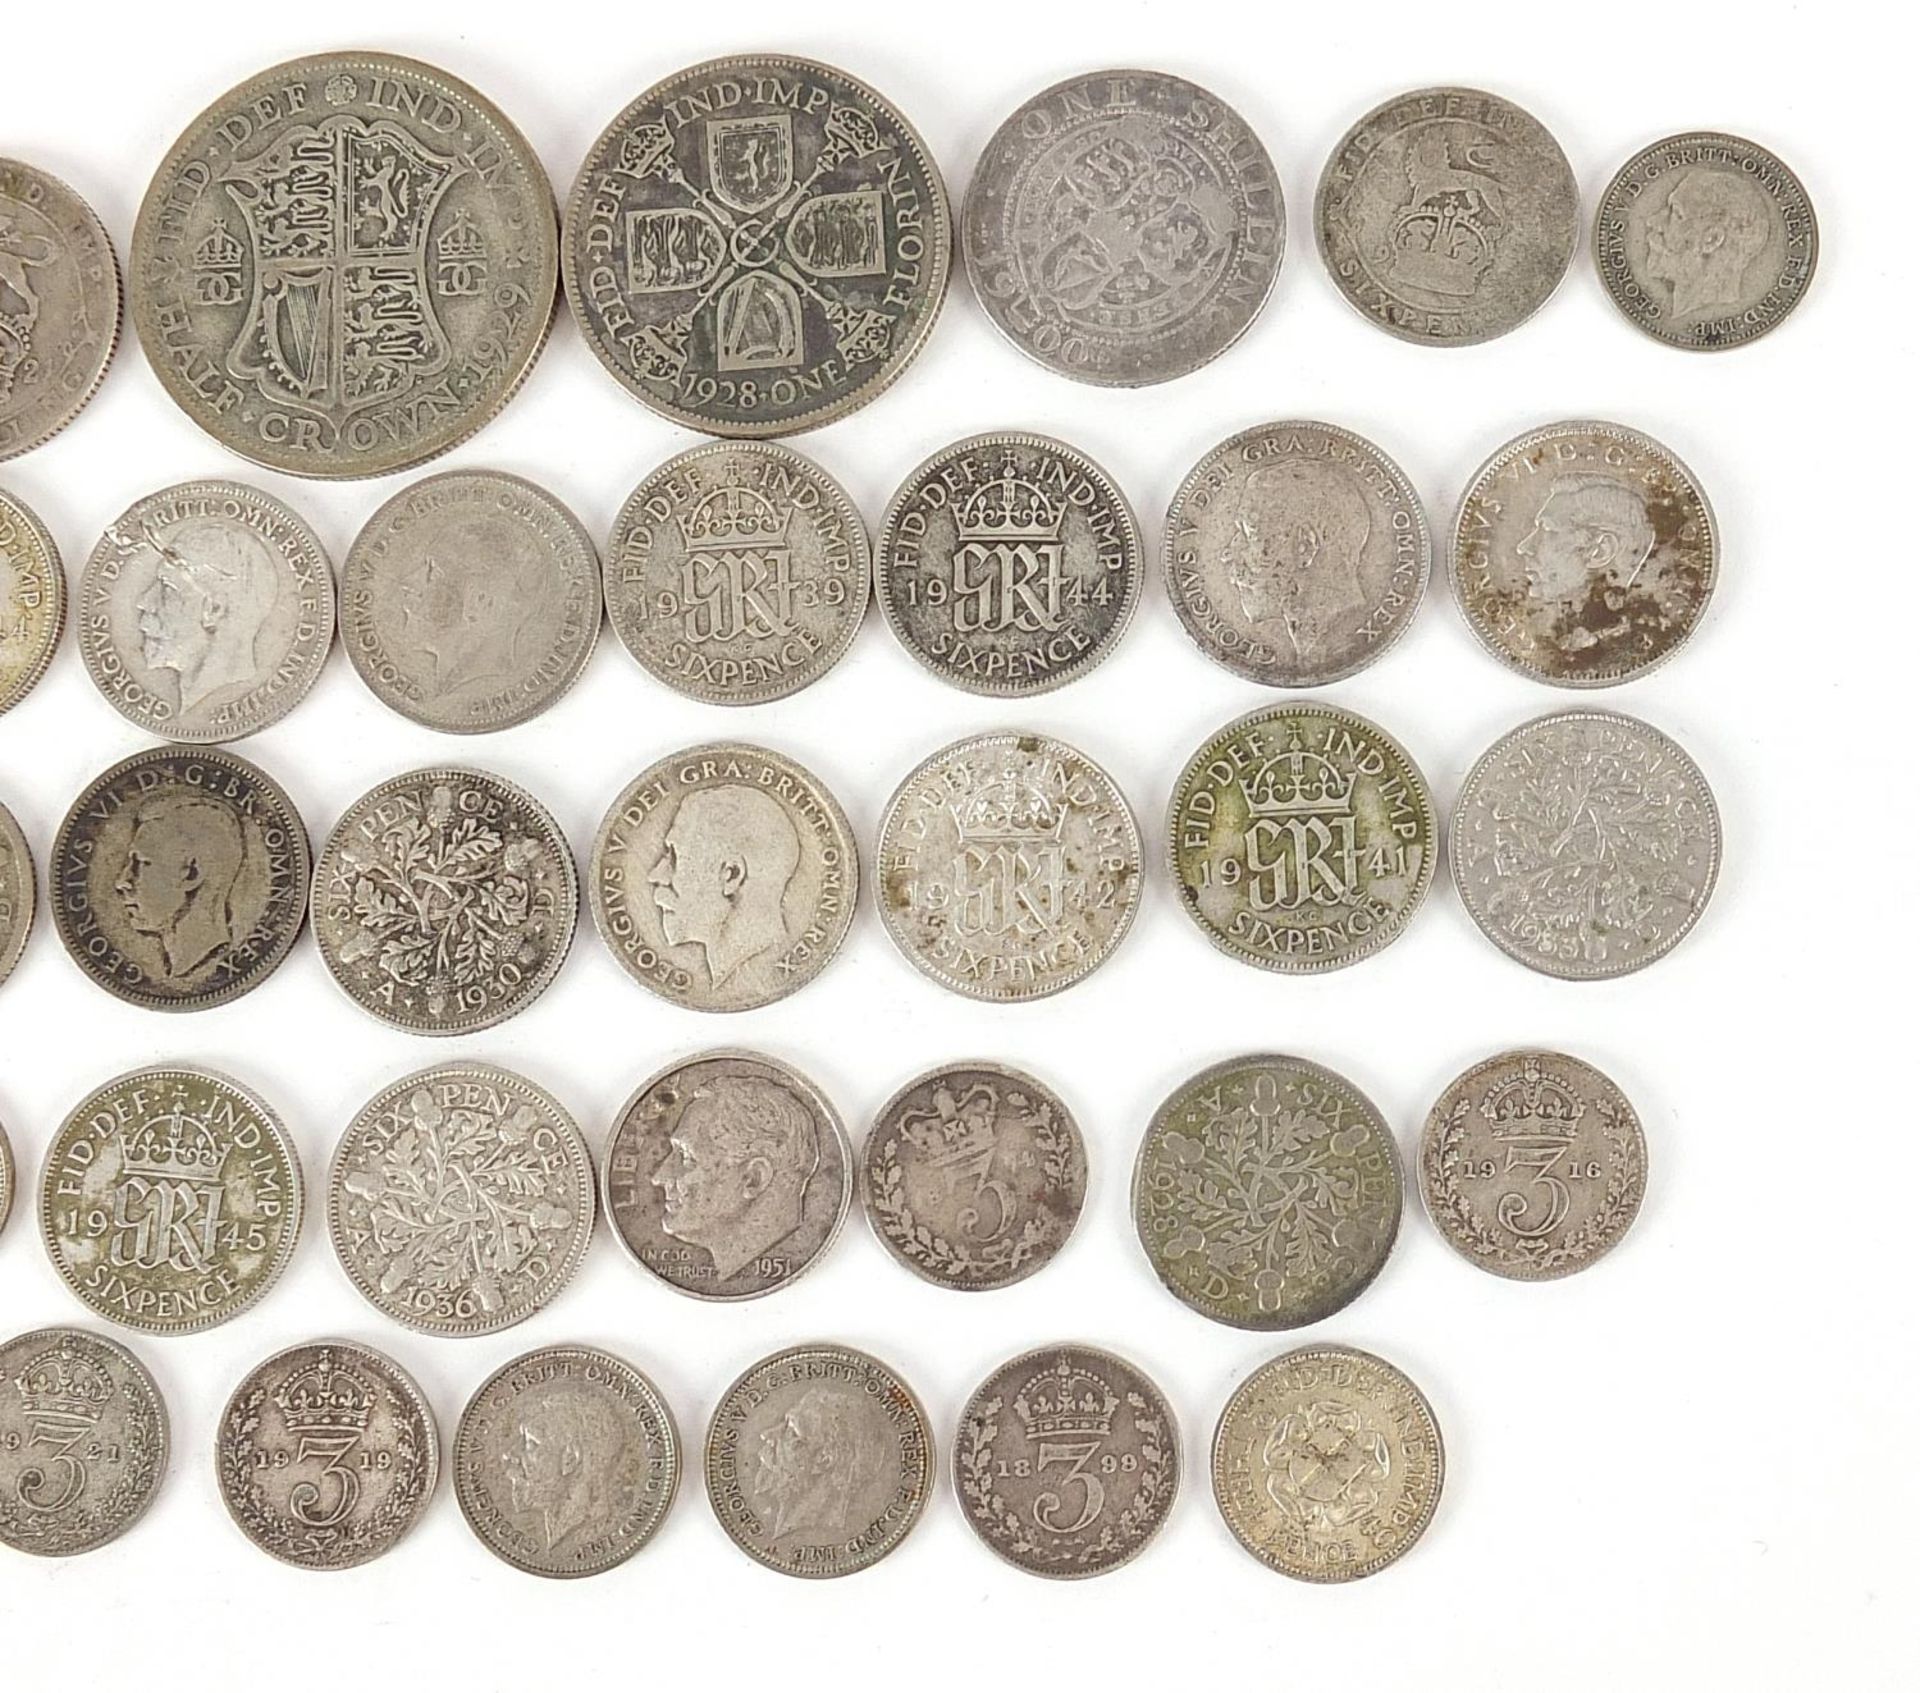 British pre decimal coins including half crowns and sixpences, 126.0g - Image 3 of 3